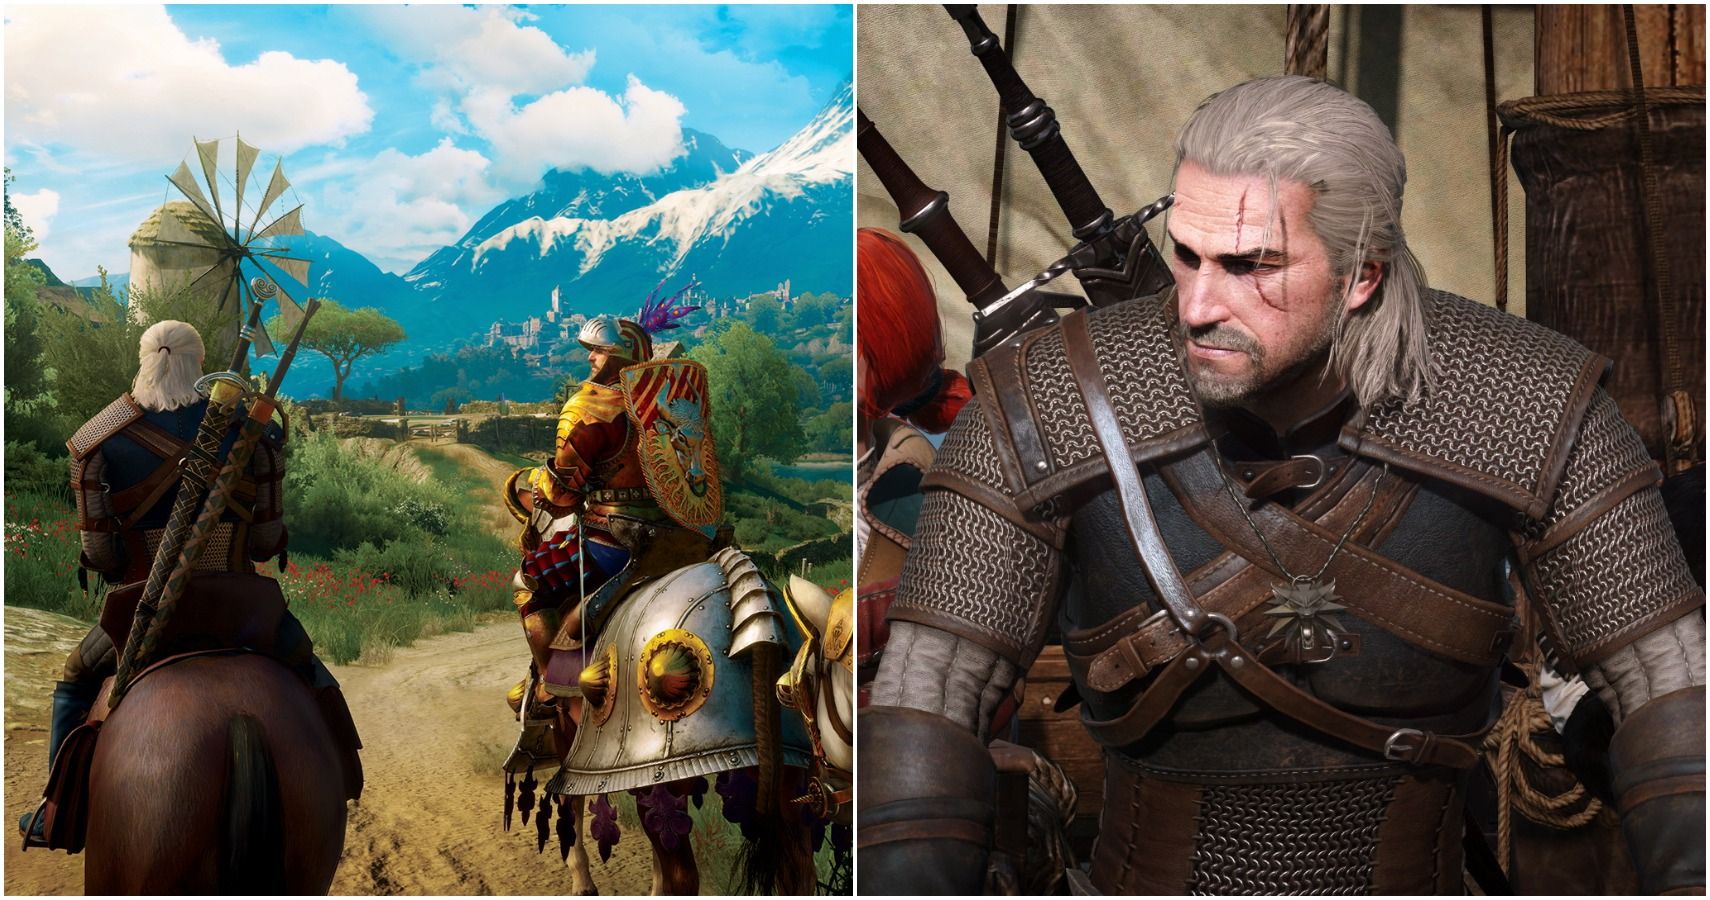 The Witcher 3: 10 Best Nexus Mods For Realistic Gameplay
